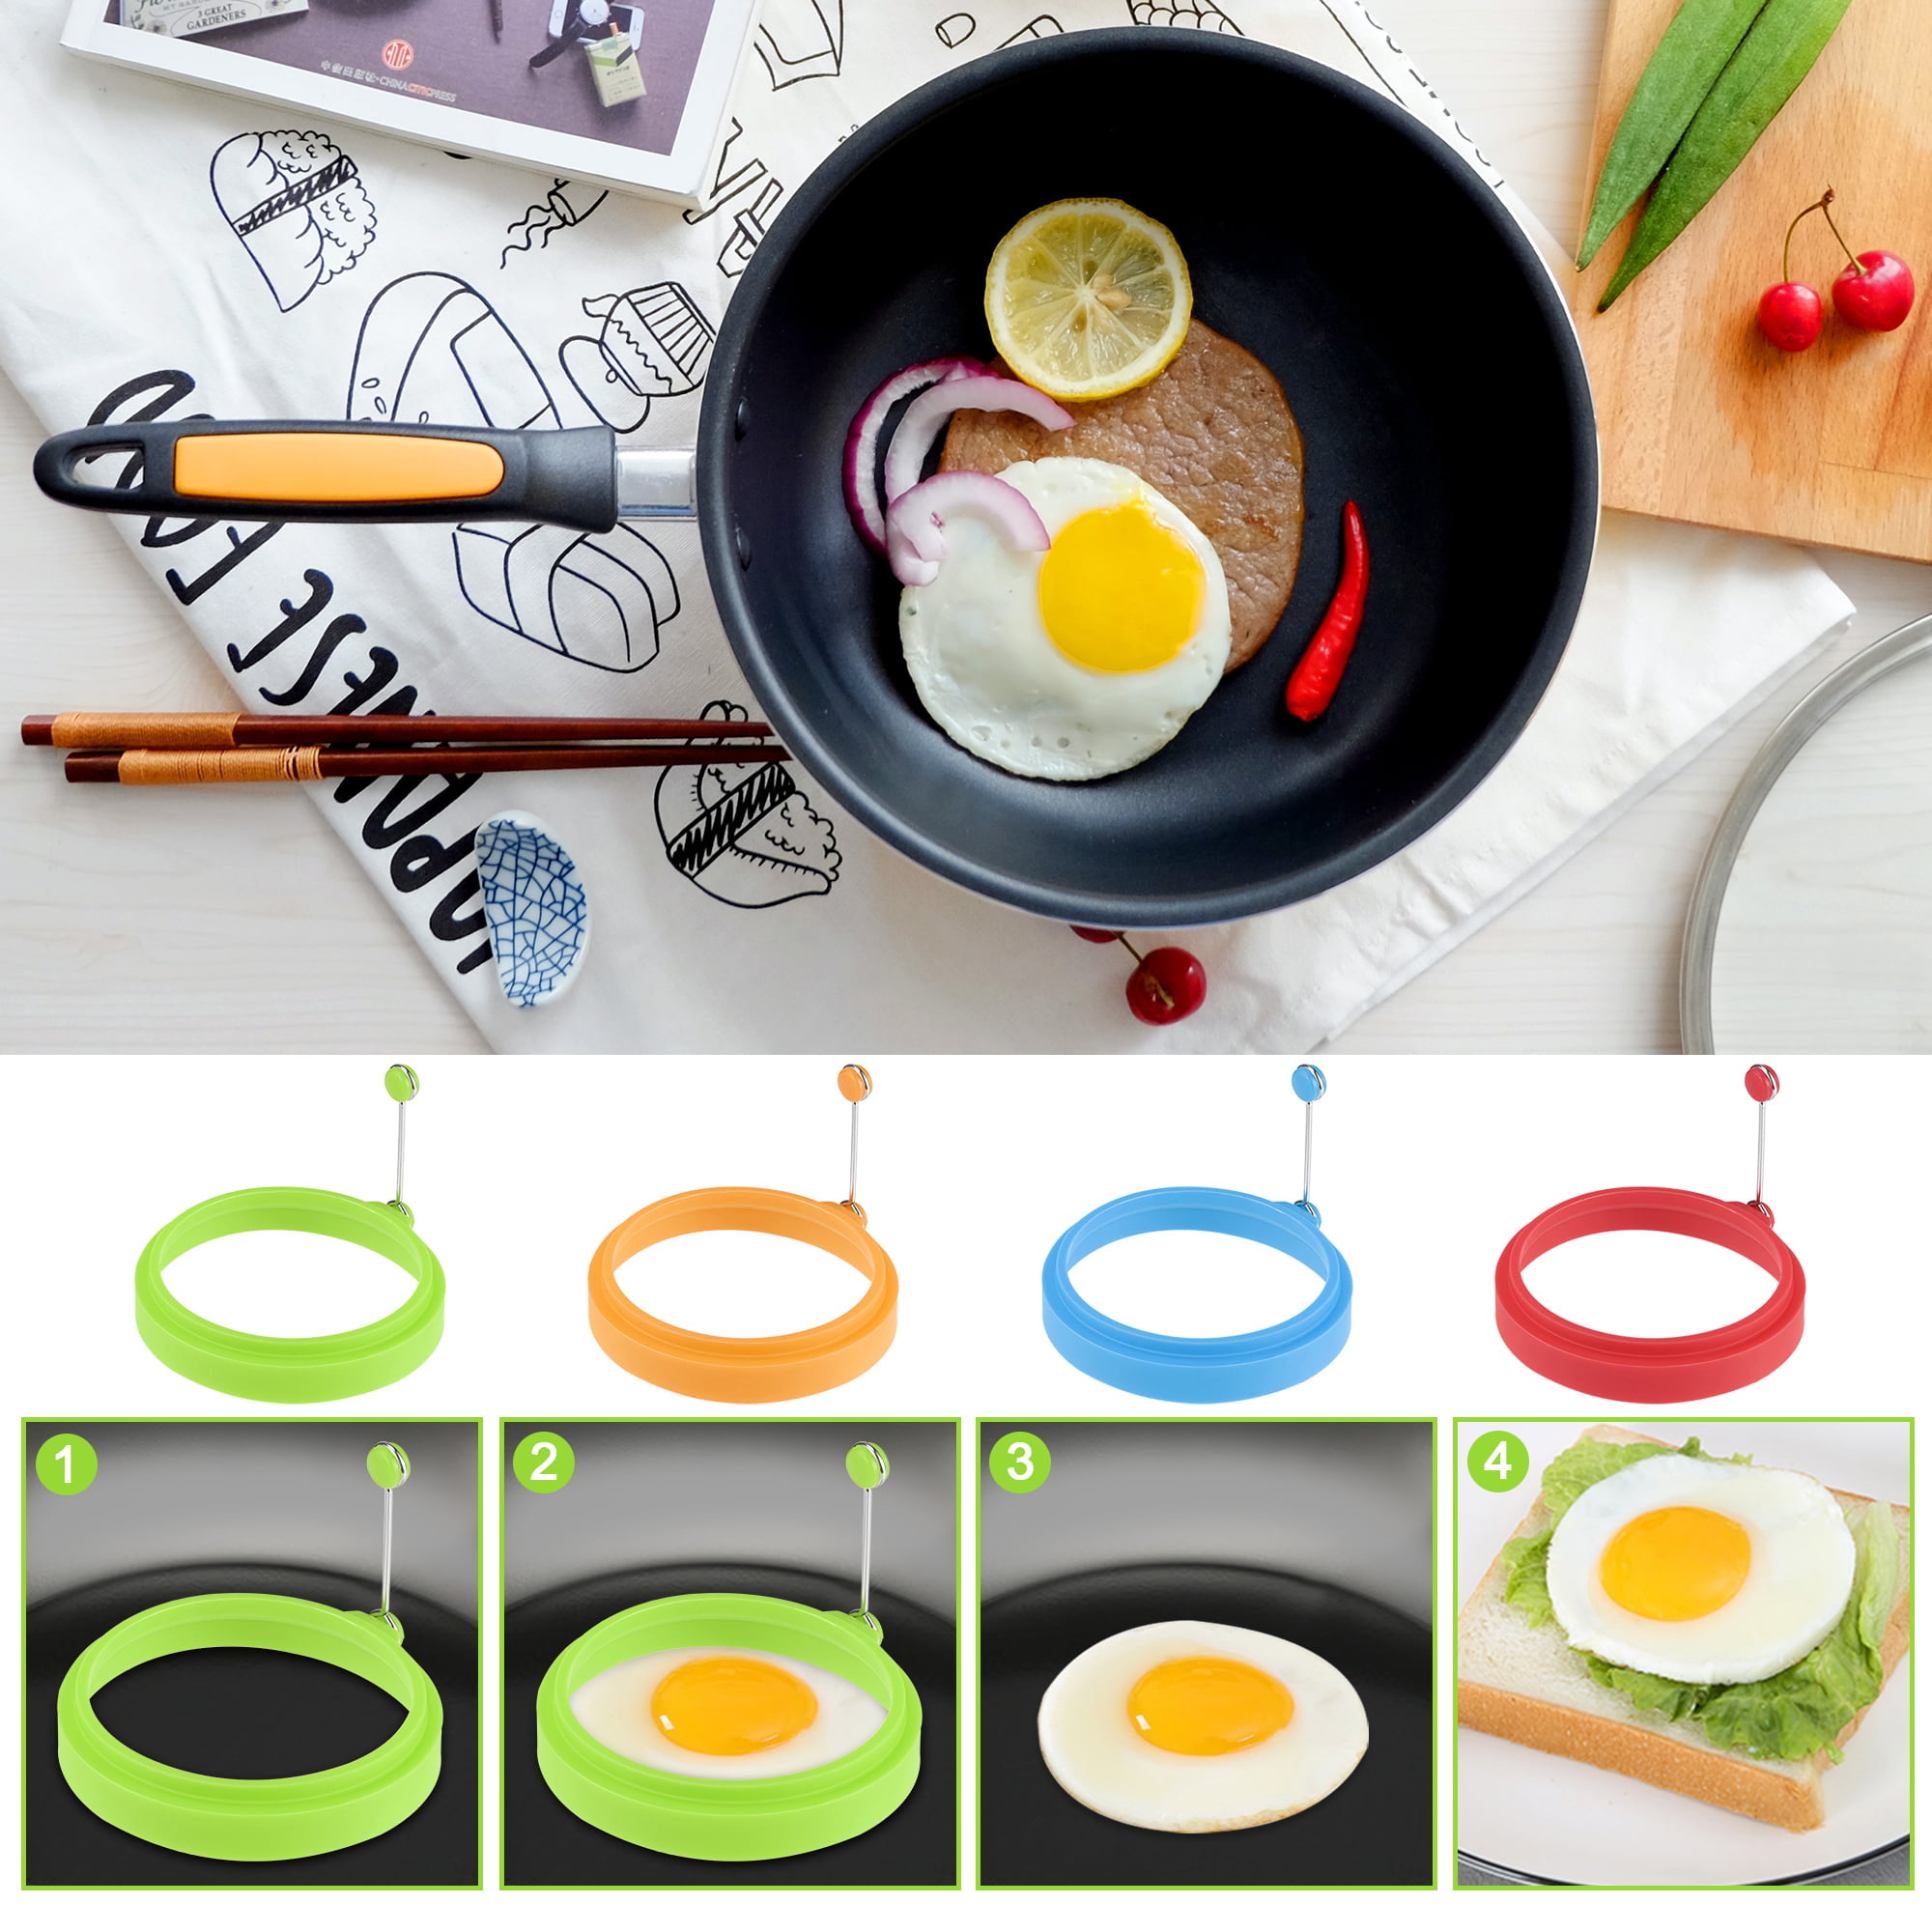 Nafxzy Egg Ring, 4 Pack Stainless Steel Egg Ring with Non Stick Metal Shaper Circles for Fried Egg McMuffin Sandwiches, Egg Maker, Set of 4